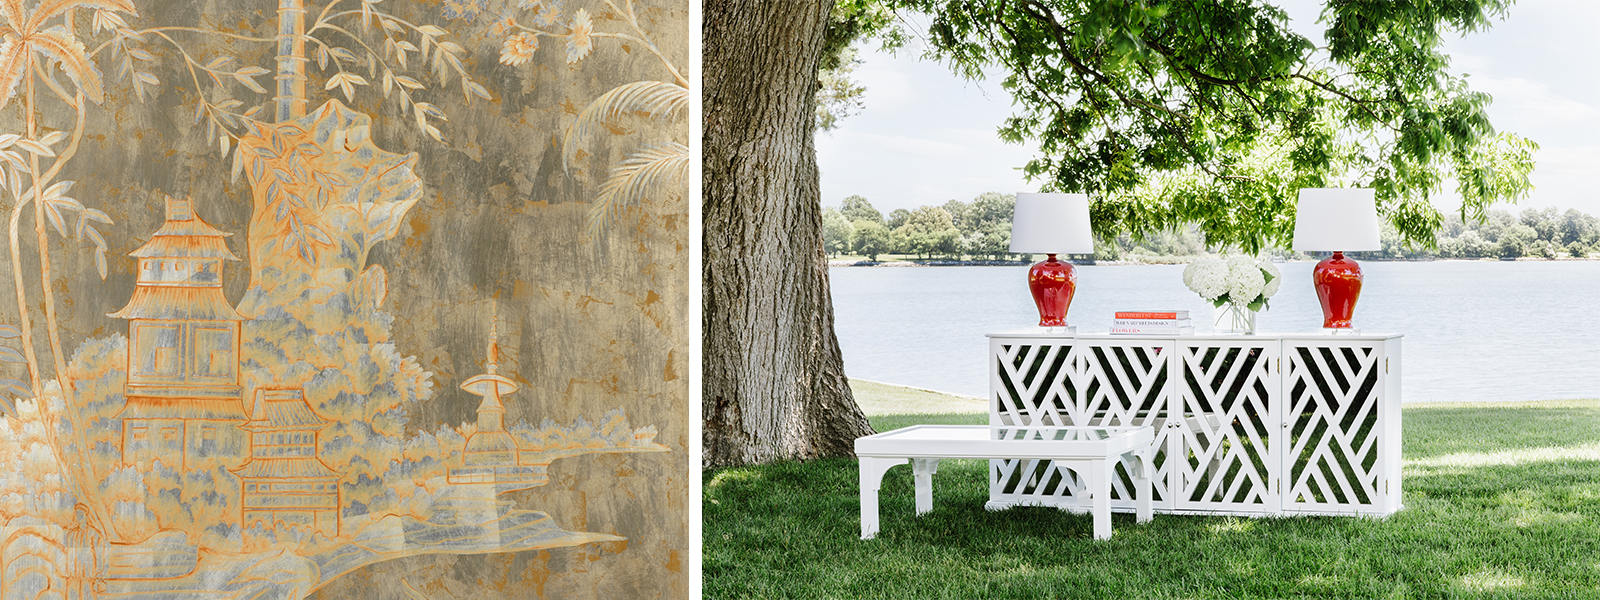 Jamie Merida Collection for Chelsea House - left side shows chinoiserie gold and silver-tone wood panel; right side shows white console cabinet and coffee table in an outdoor setting